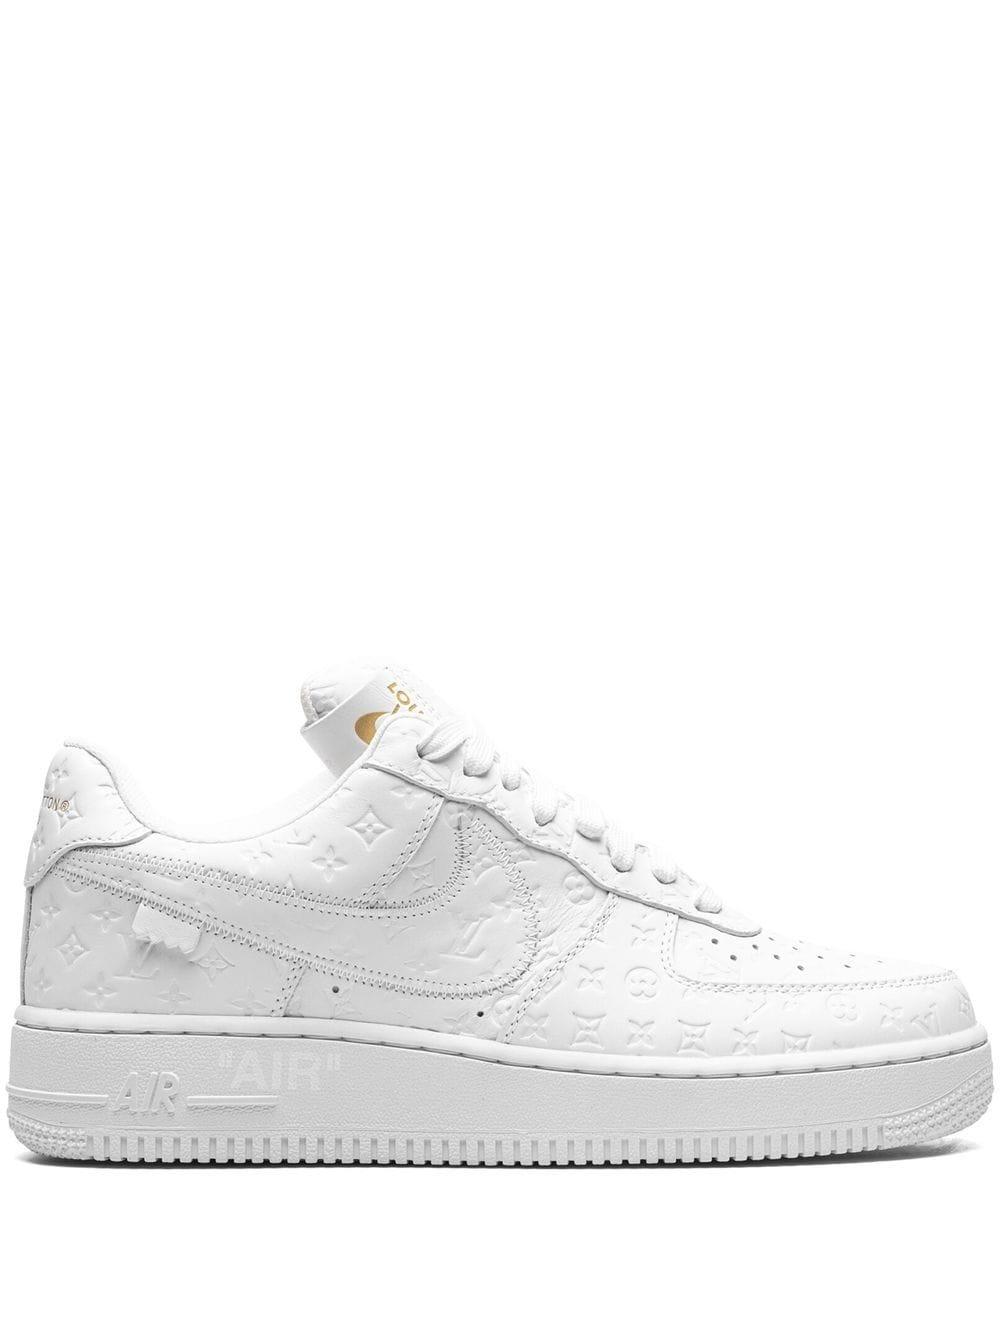 Nike X Louis Vuitton Air Force 1 Low Sneakers in White | Lyst